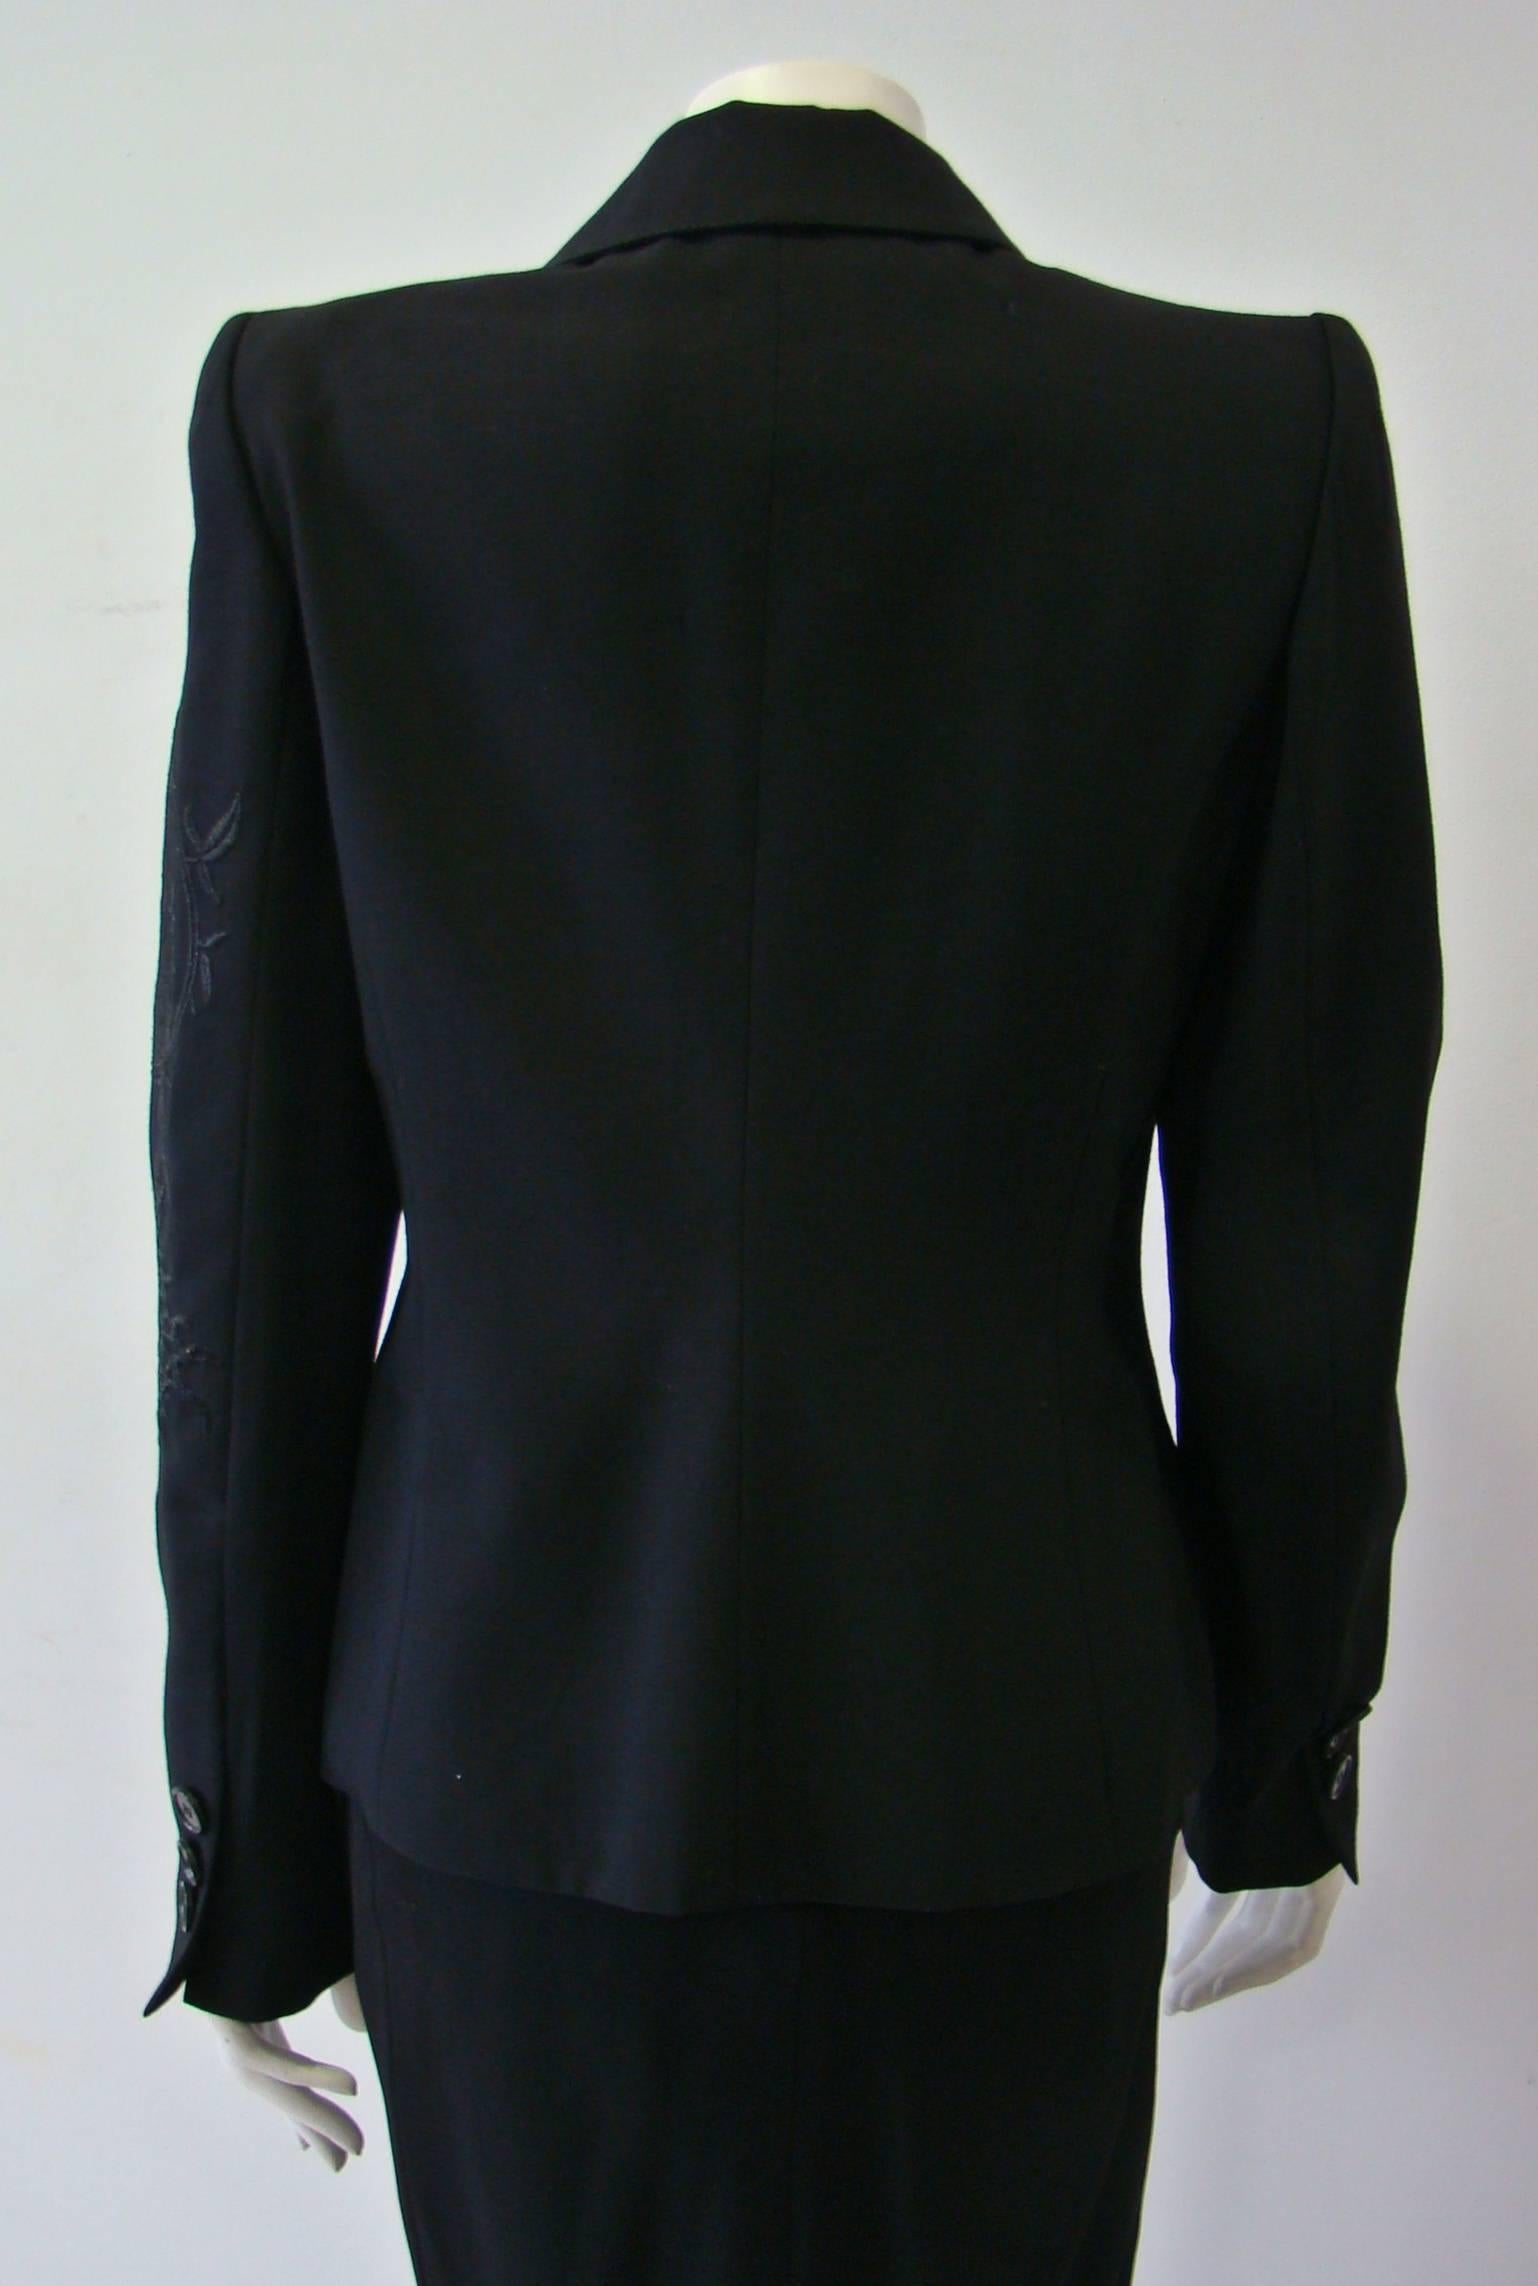 Angelo Mozzillo Embroidered Jacket Fall 1998 For Sale 1